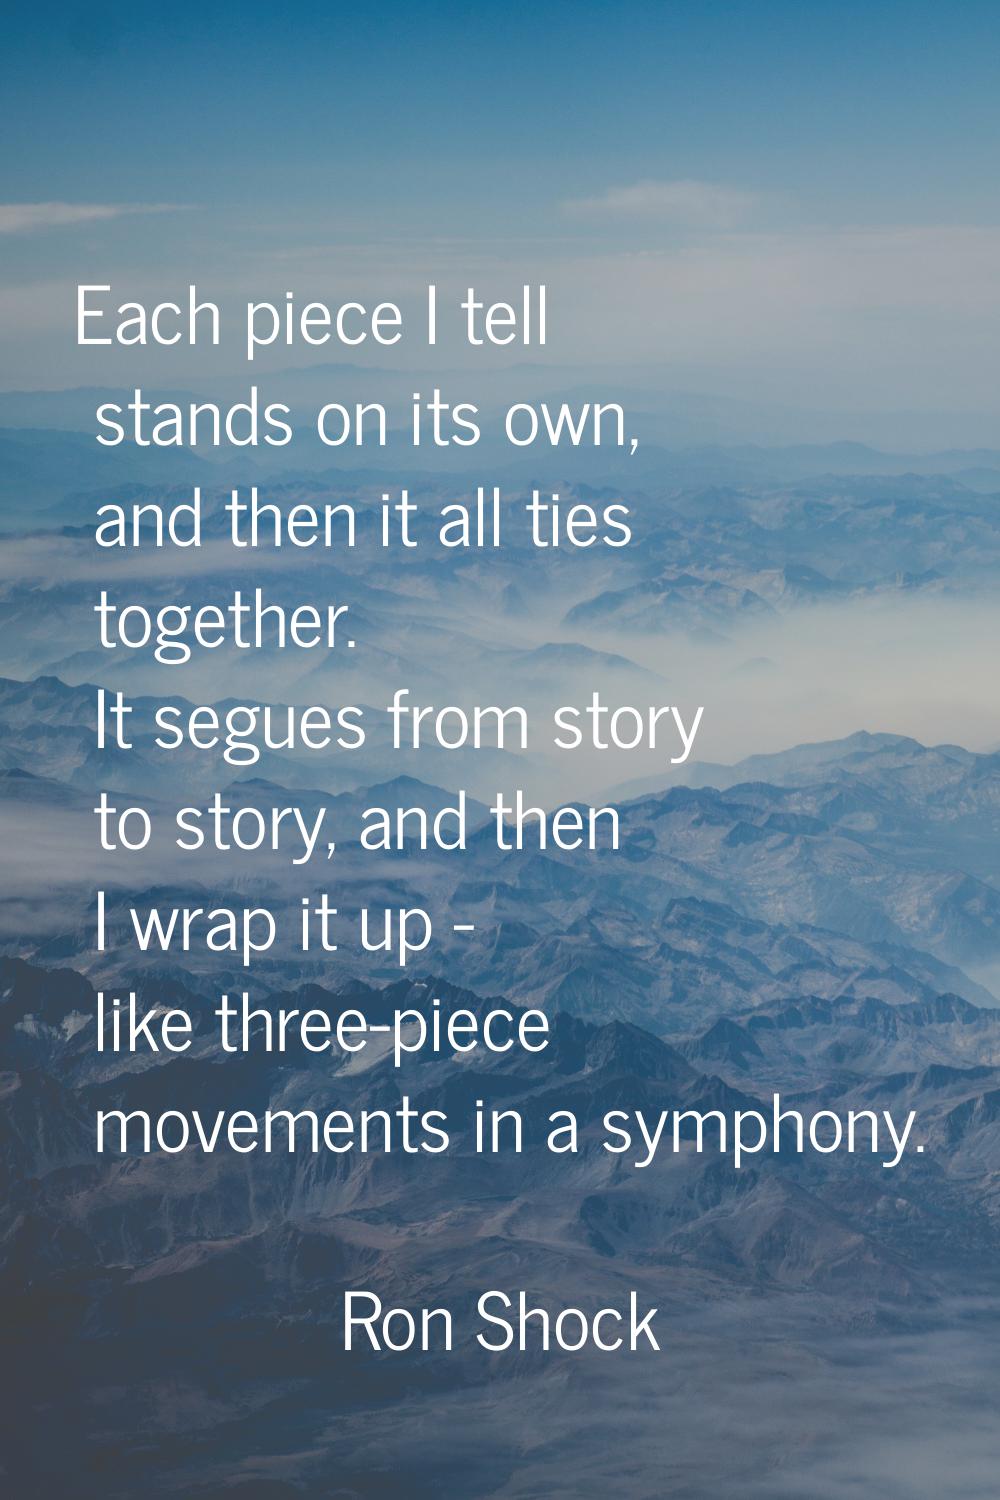 Each piece I tell stands on its own, and then it all ties together. It segues from story to story, 